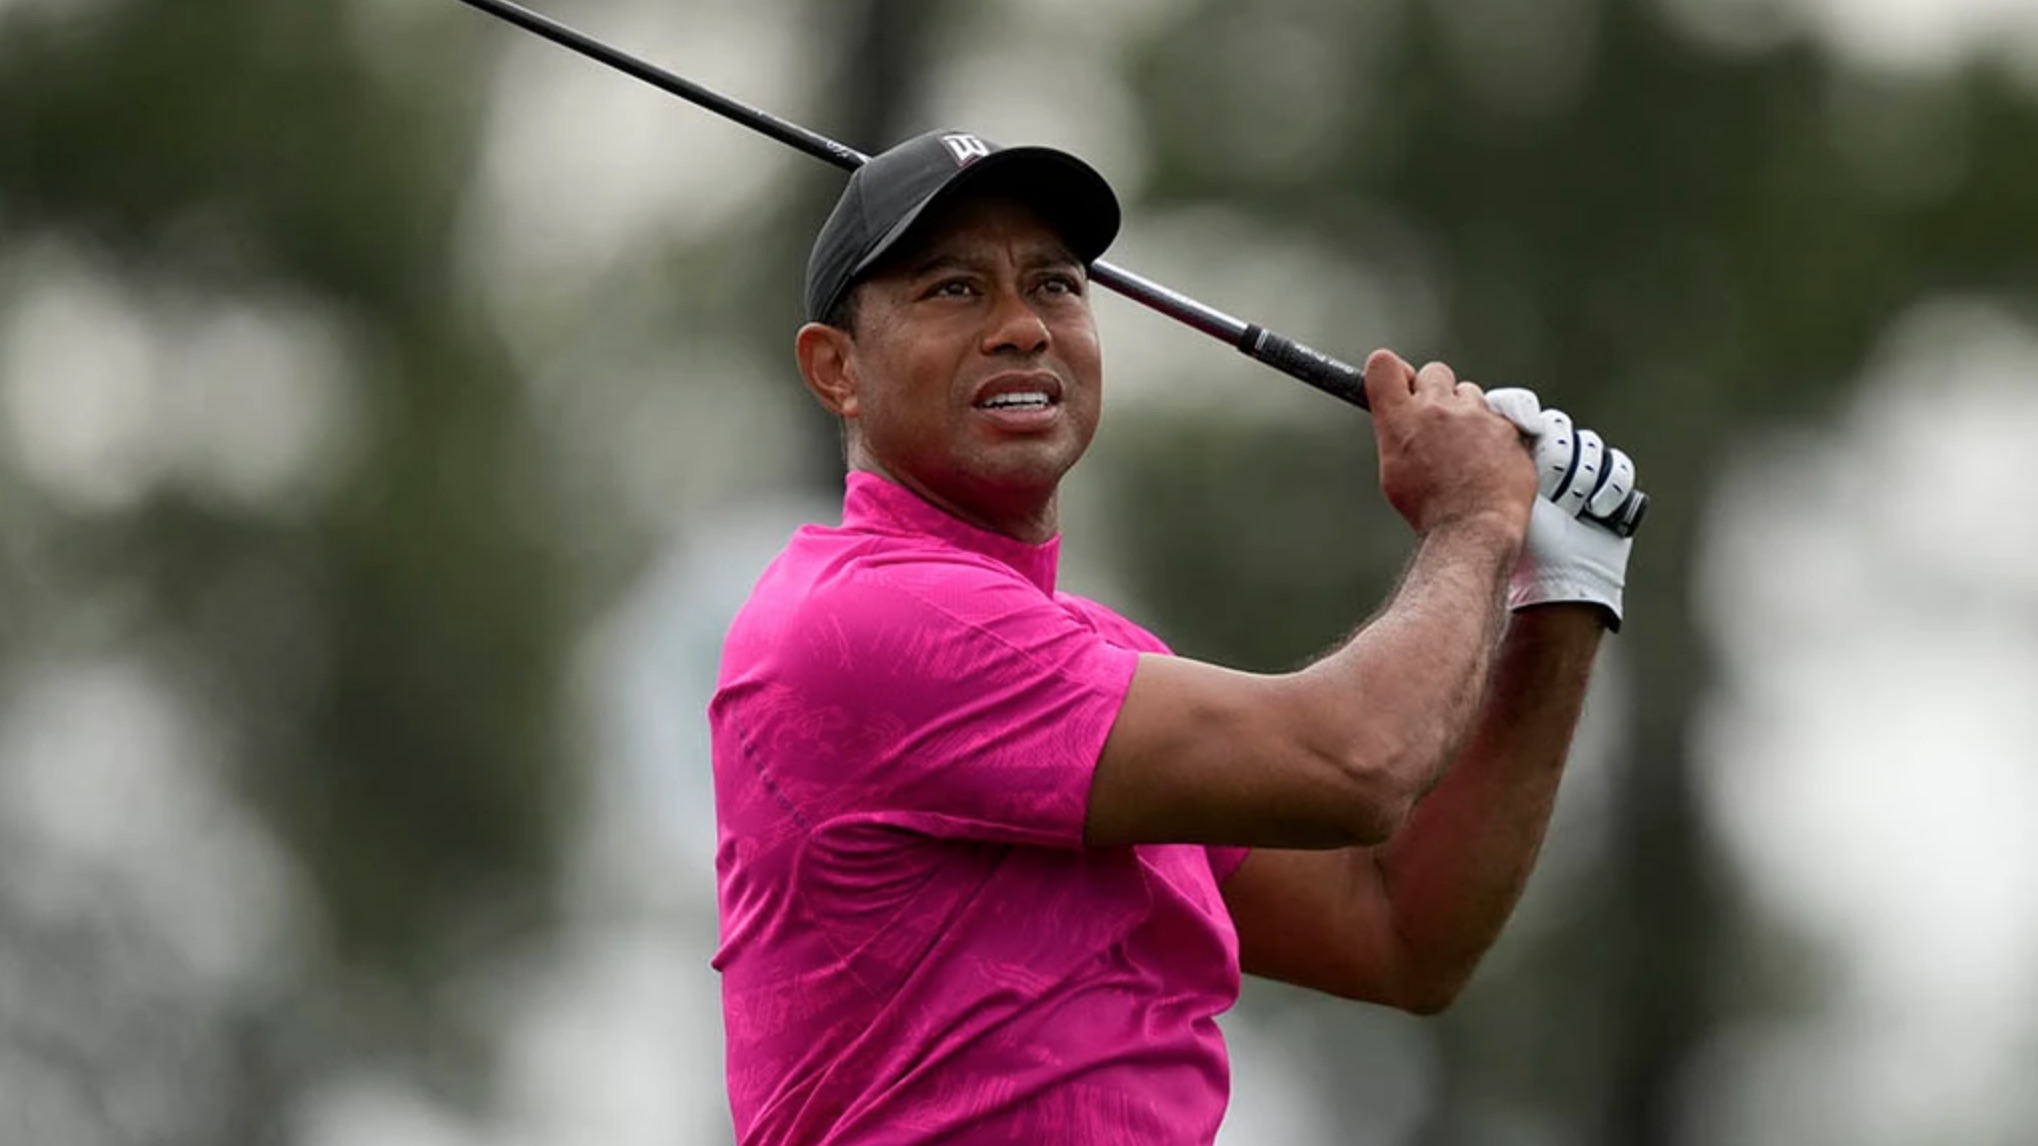 Tiger Woods announces he intends to play Masters tournament one